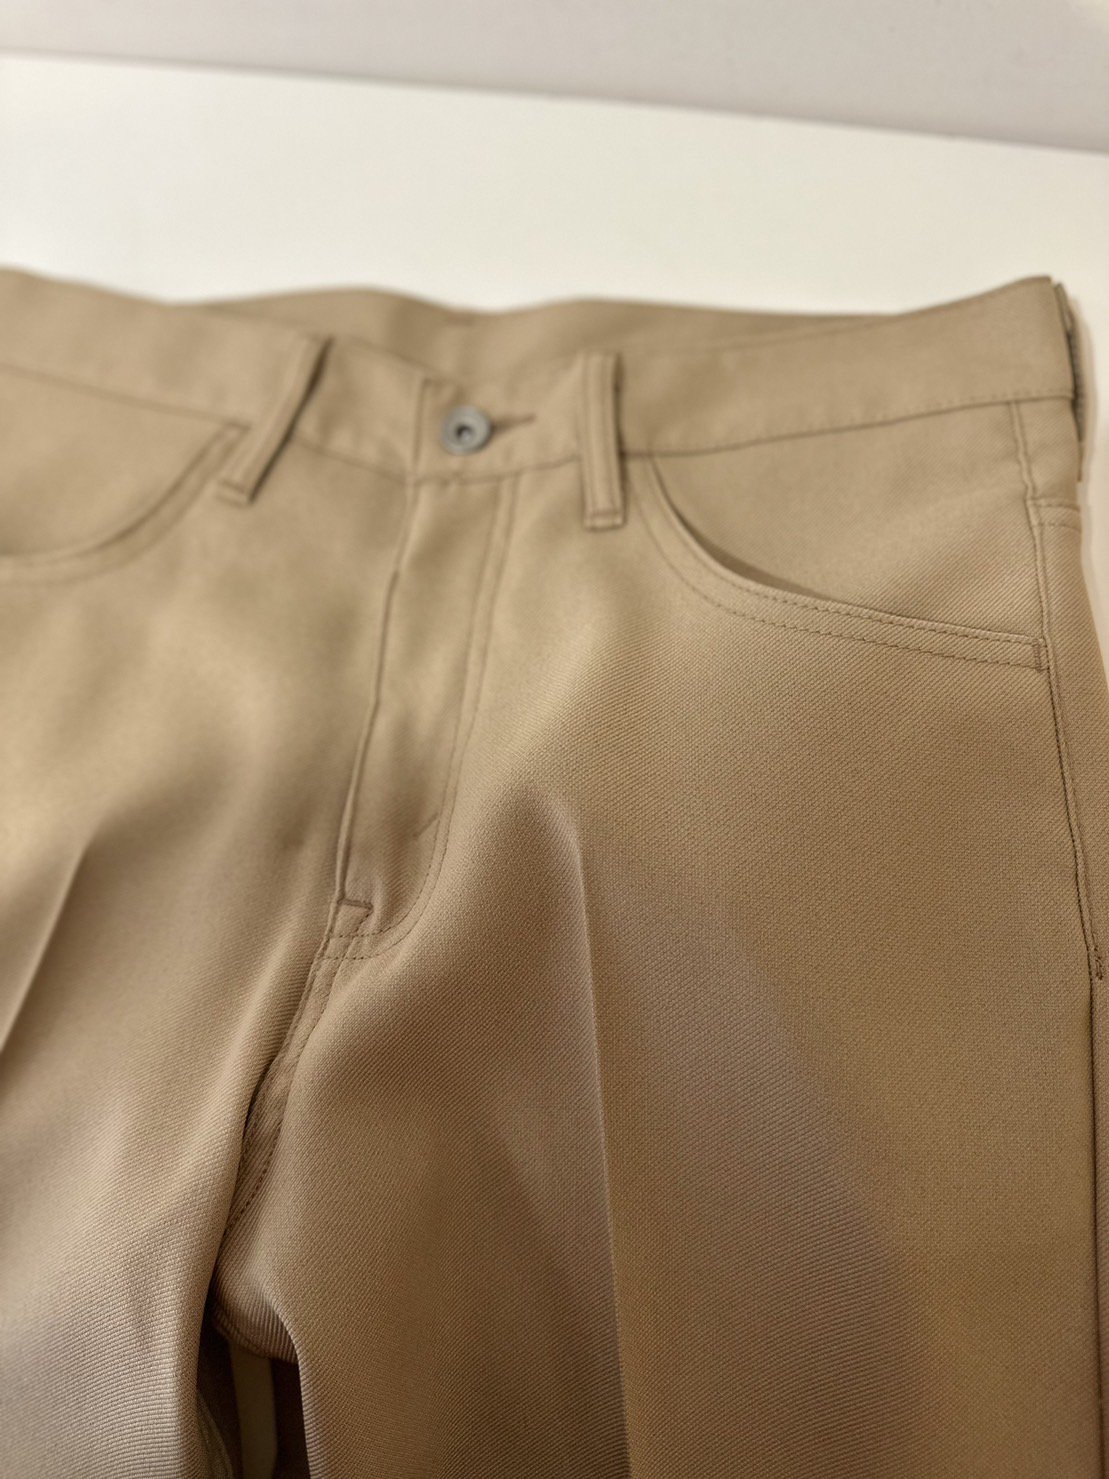 DAIRIKU<br />Straight Pressed Pants / Beige<img class='new_mark_img2' src='https://img.shop-pro.jp/img/new/icons14.gif' style='border:none;display:inline;margin:0px;padding:0px;width:auto;' />